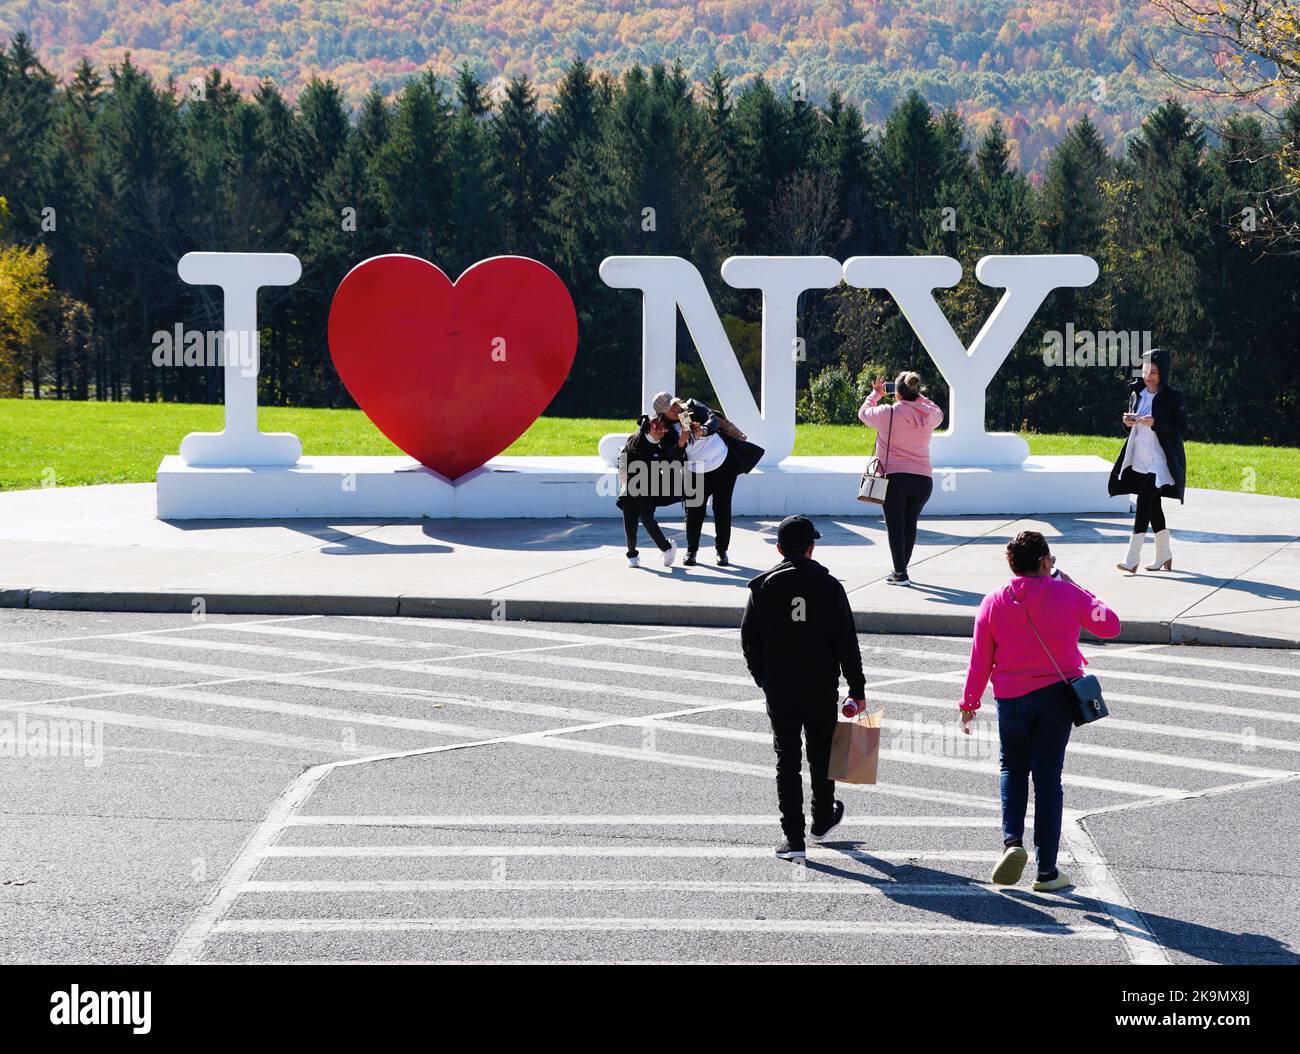 Kirkwood, New York, U.S.A - October 15, 2022 - Visitors taking pictures near the 'I Love NY' sign located near the rest stop Stock Photo